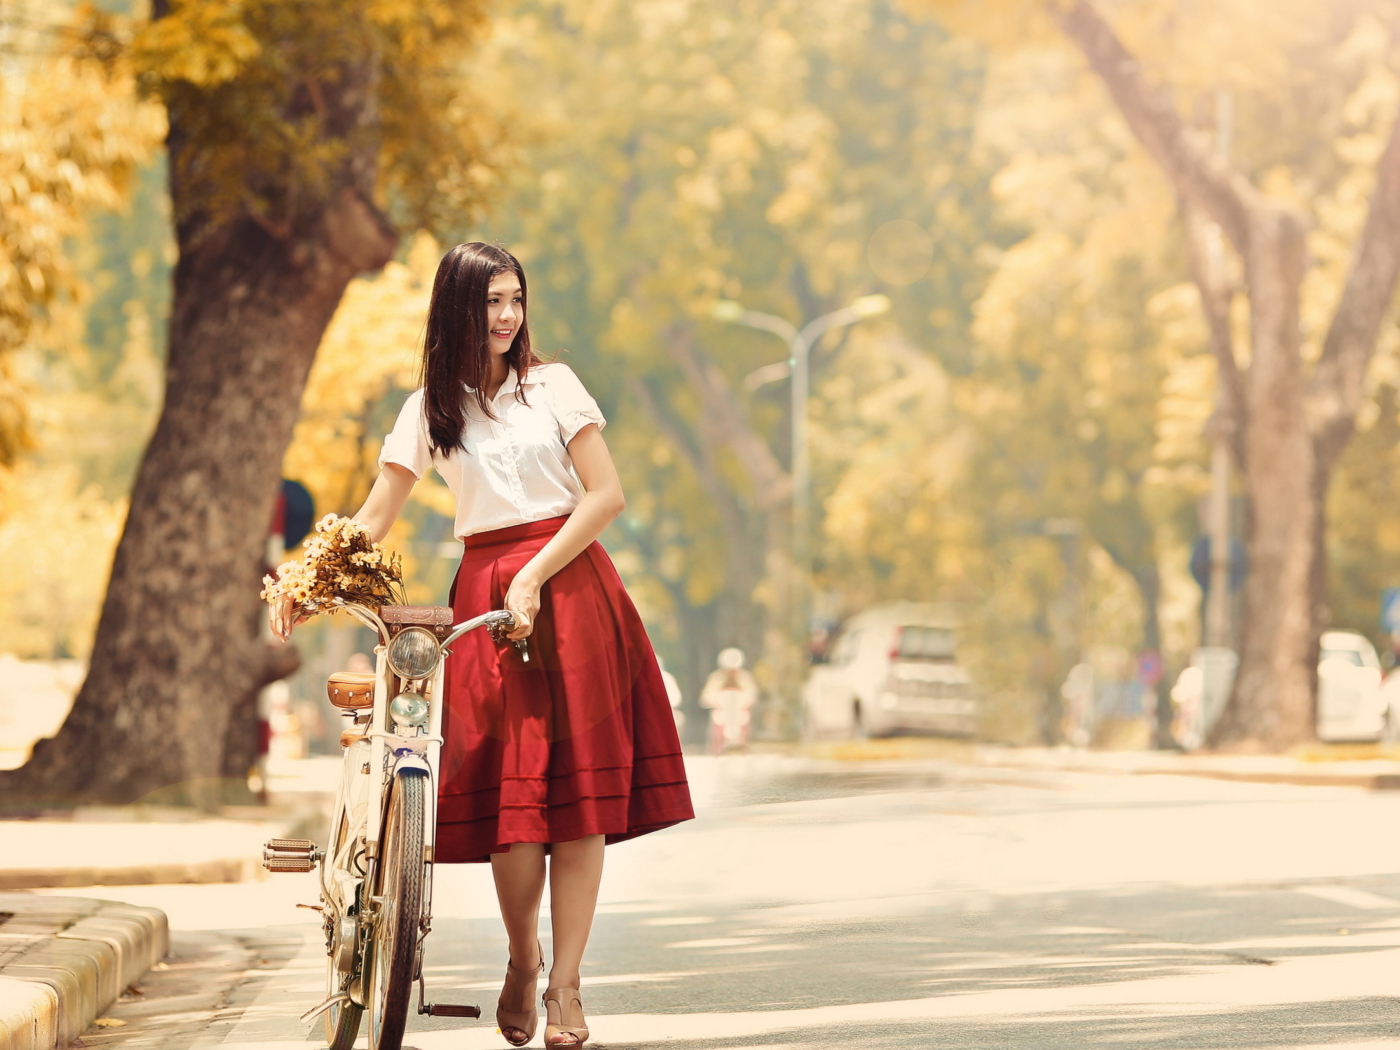 Das Romantic Girl With Bicycle And Flowers Wallpaper 1400x1050